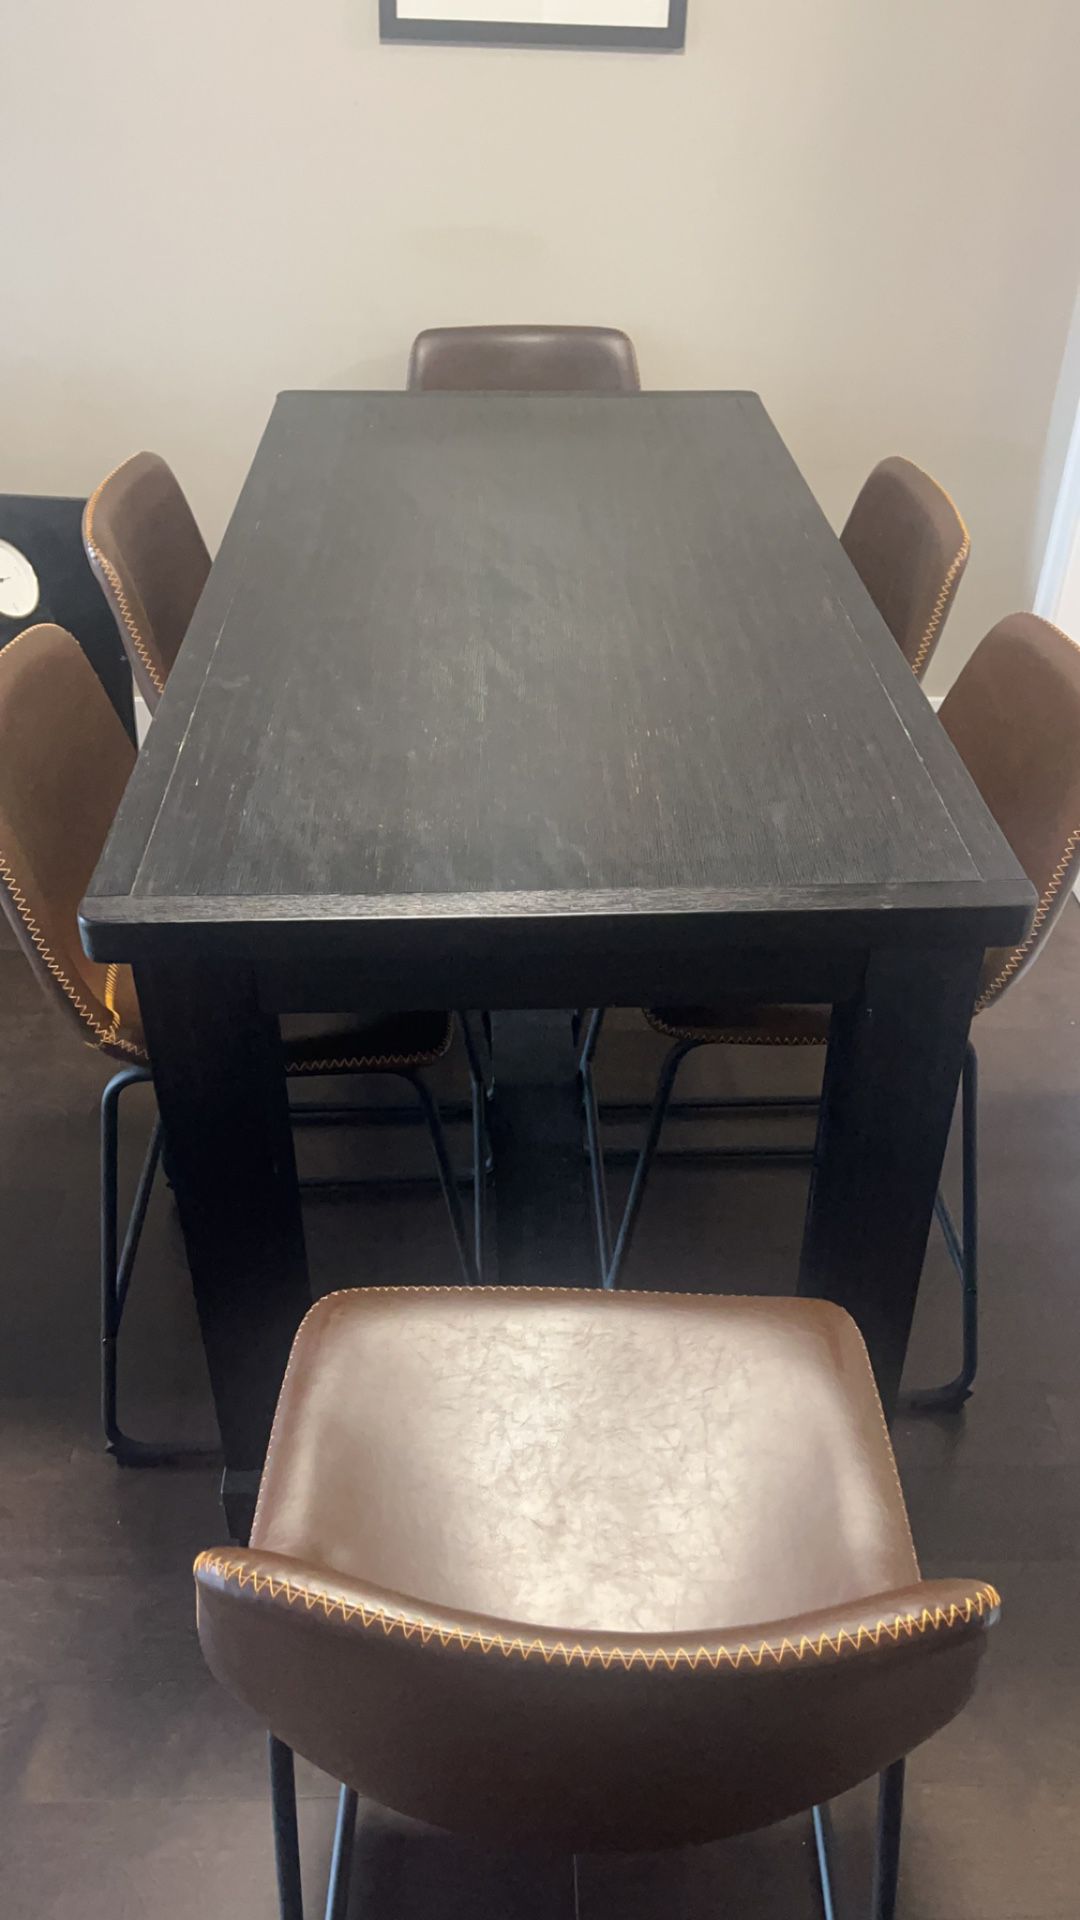 6 Seater High Top Table And Chairs - Accepting Best Offer